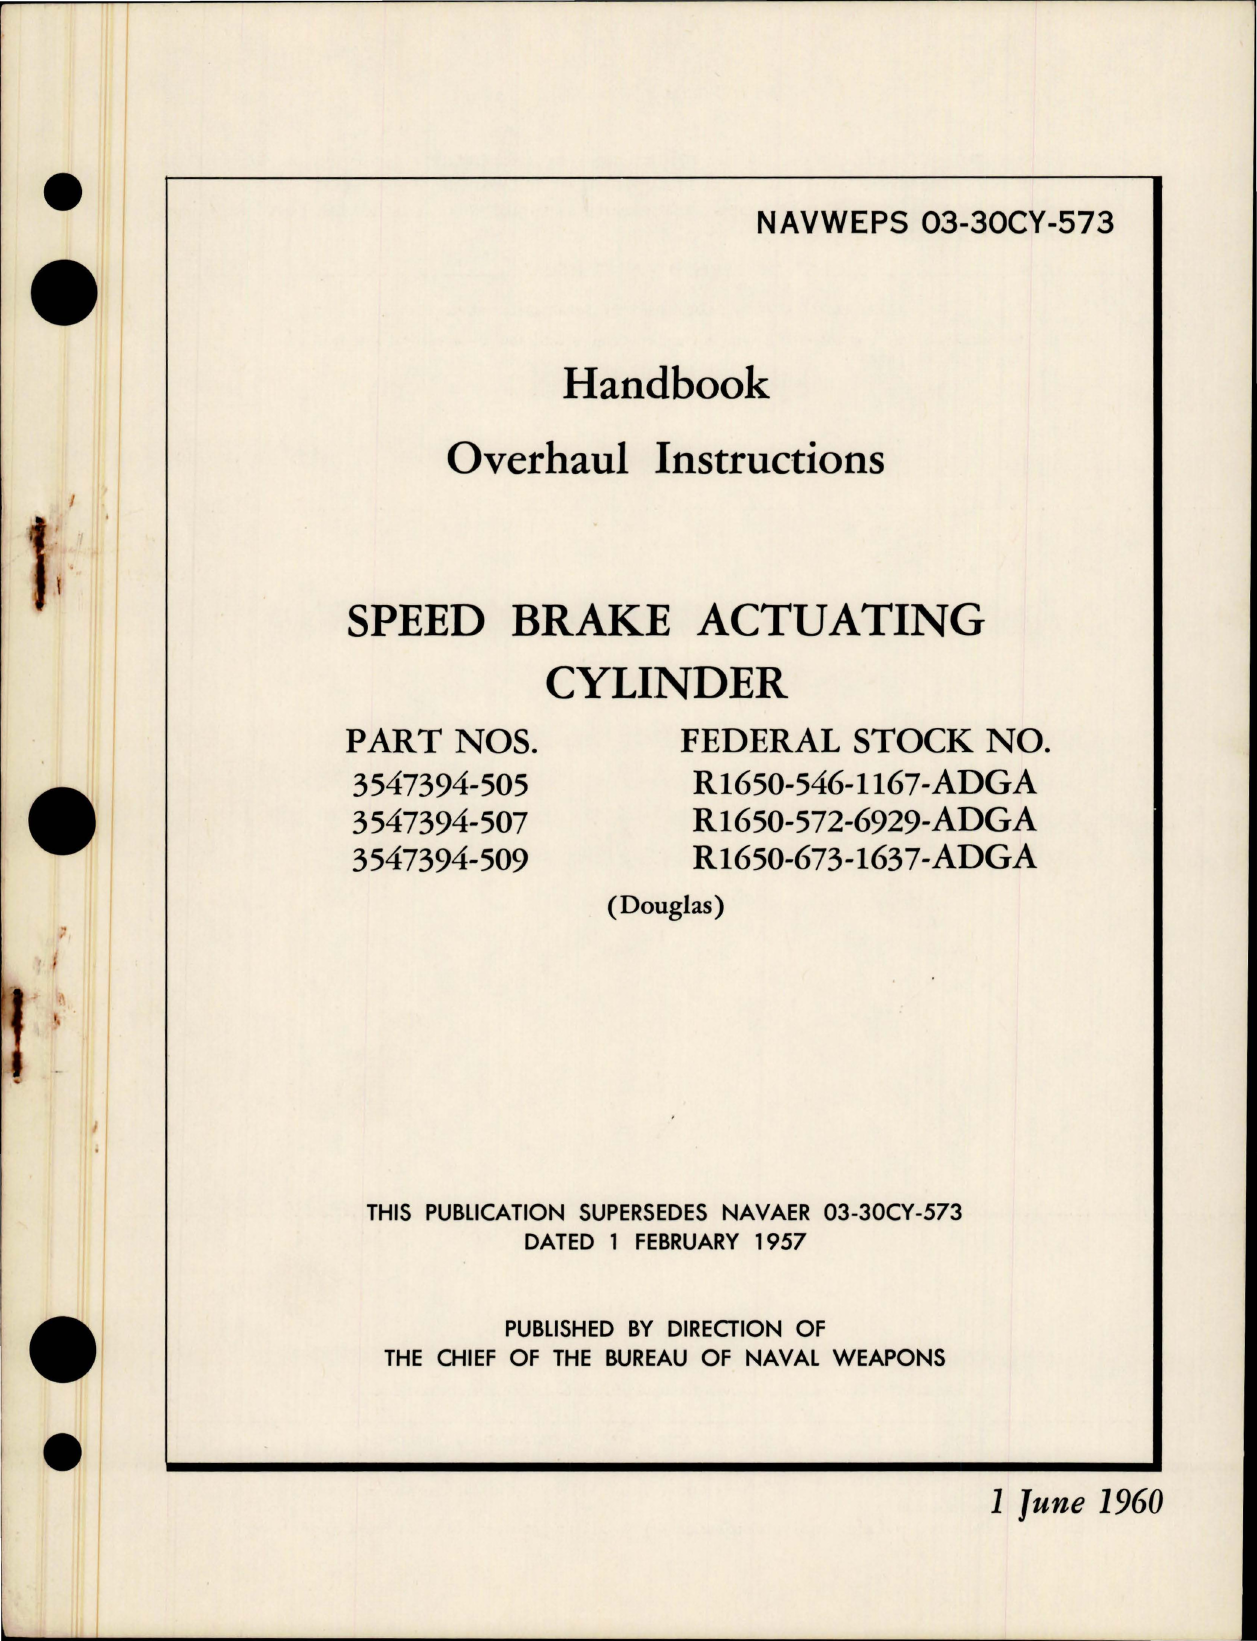 Sample page 1 from AirCorps Library document: Overhaul Instructions for Speed Brake Actuating Cylinder